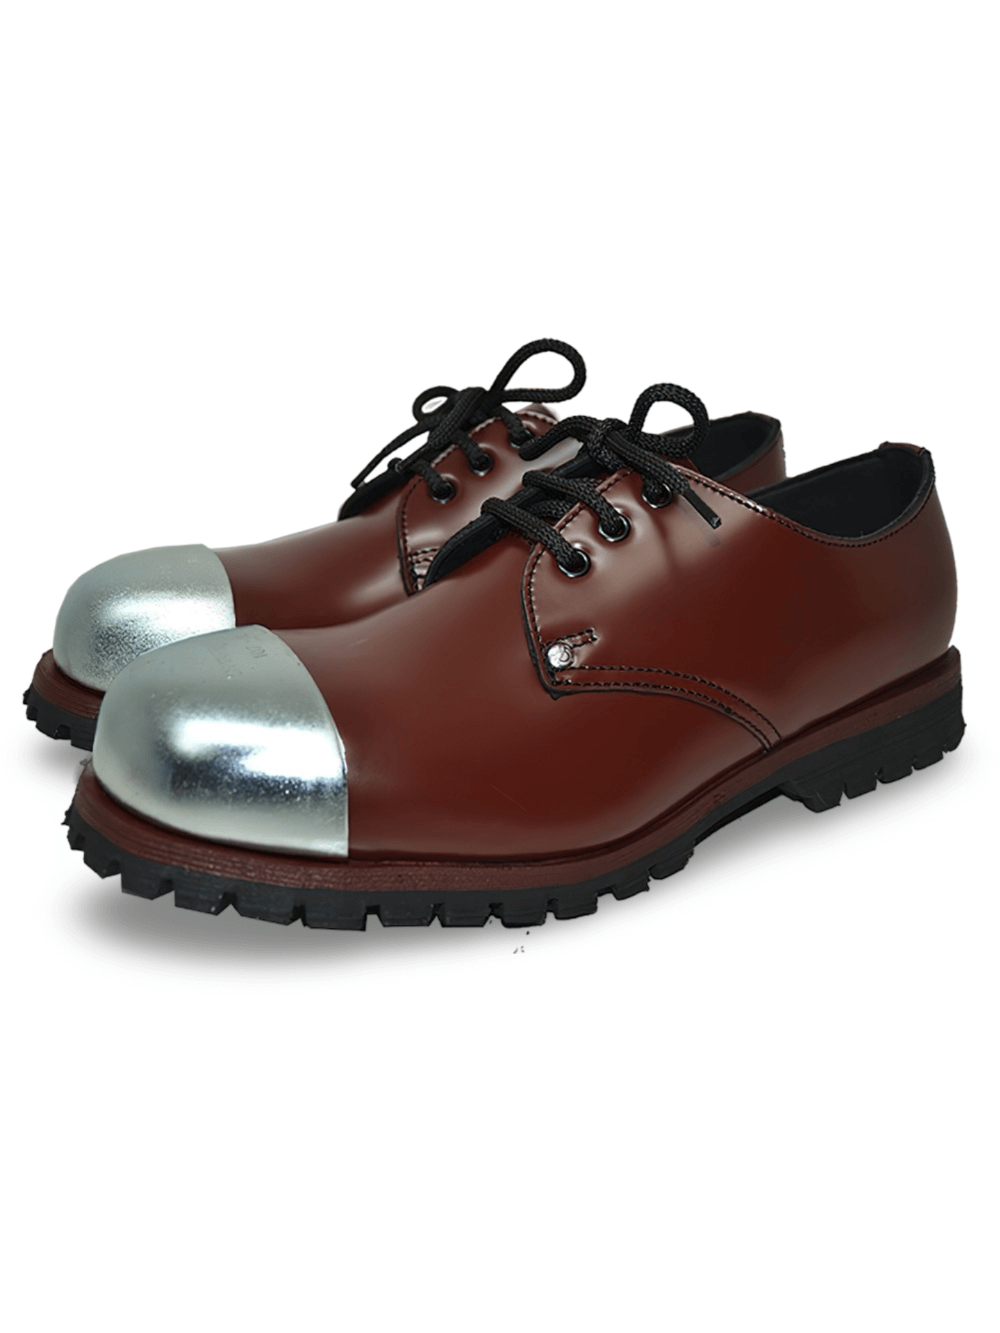 Brown Genuine Leather Rangers Shoes with Steel Toe